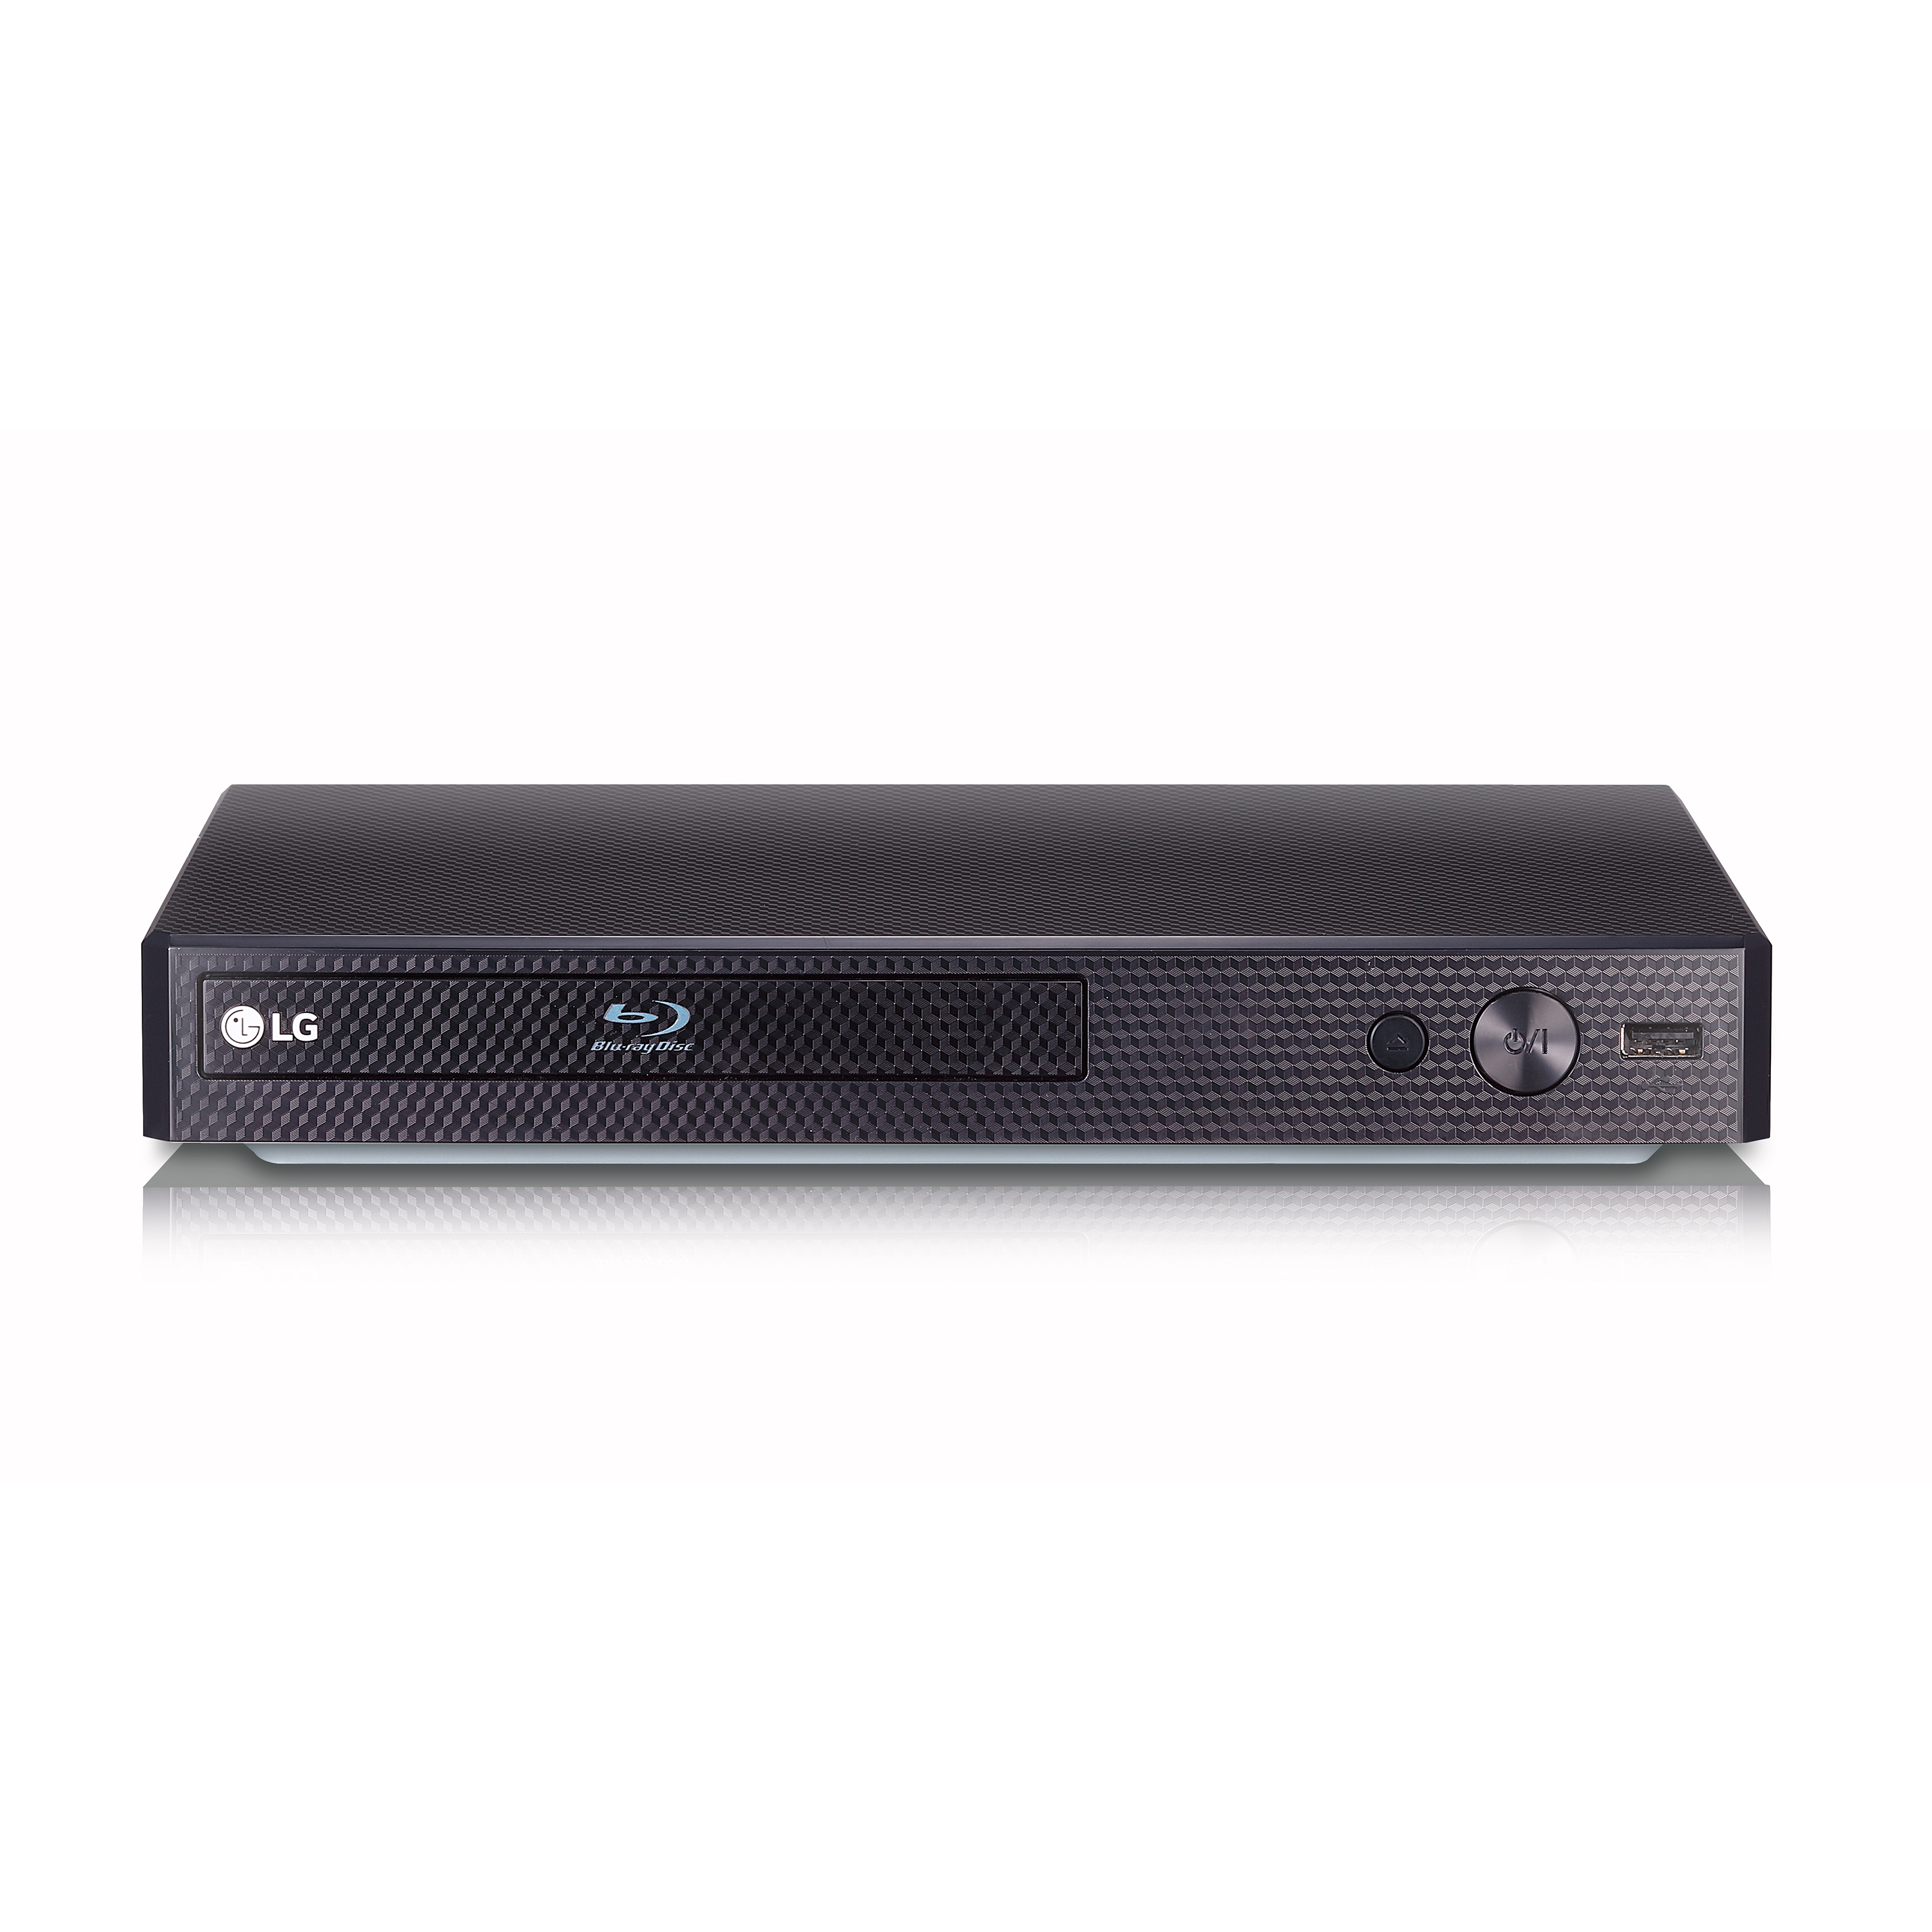 LG Blu-ray Player with Streaming Services - BPM25 - image 1 of 12